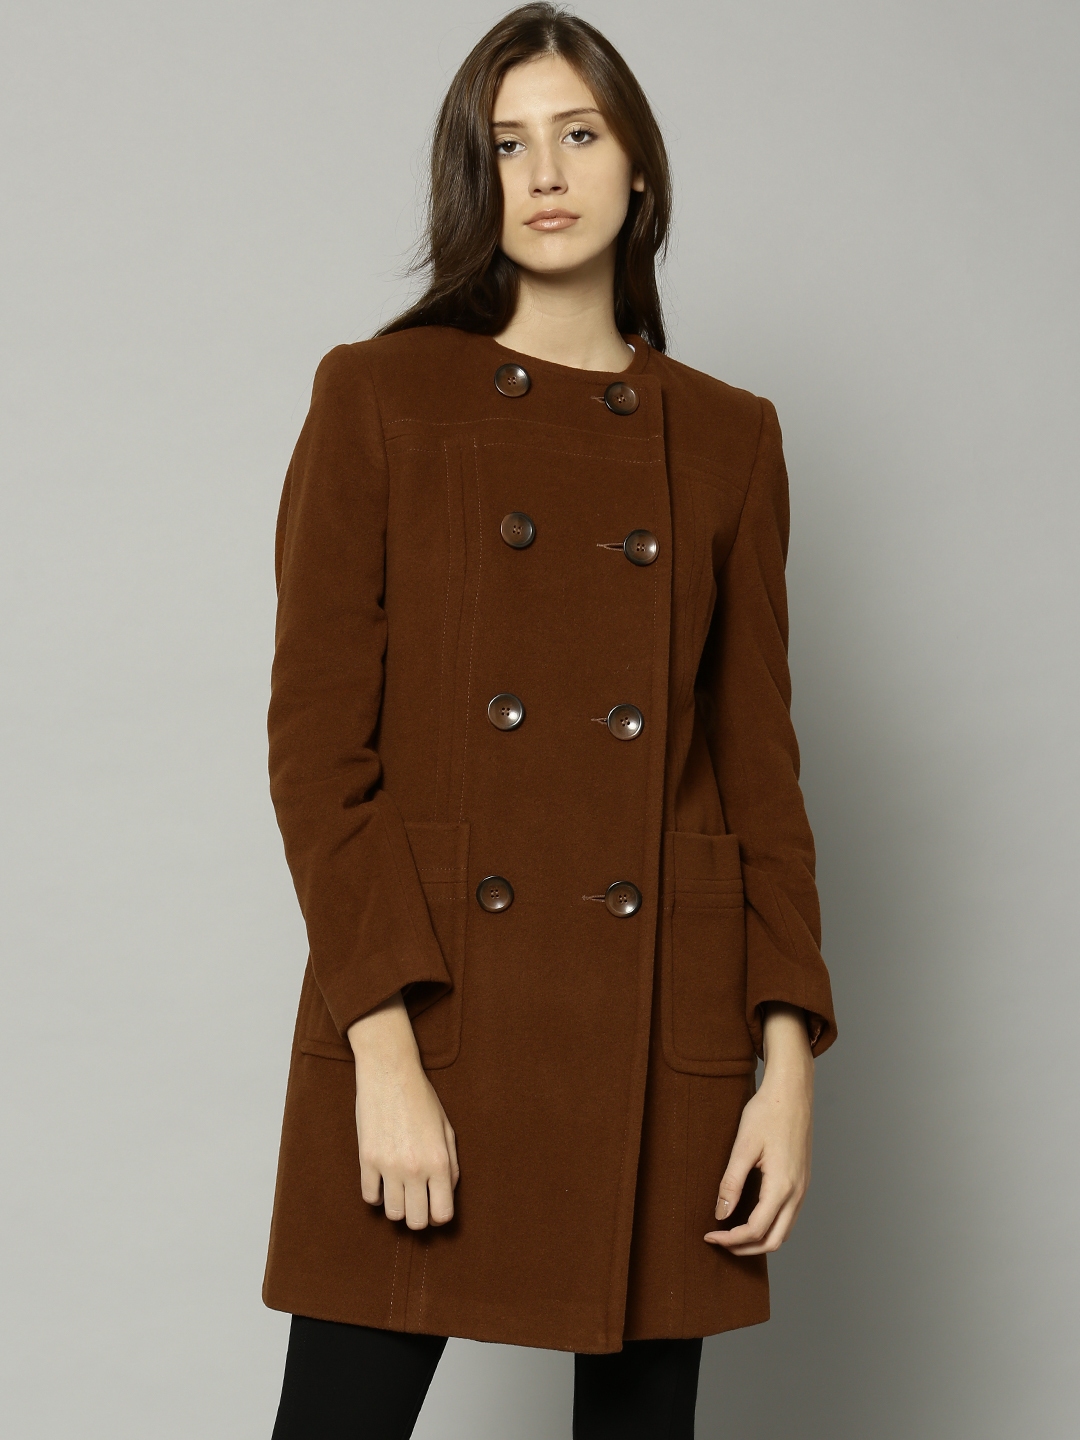 Buy Marks & Spencer Brown Trench Coat - Coats for Women 1593419 | Myntra